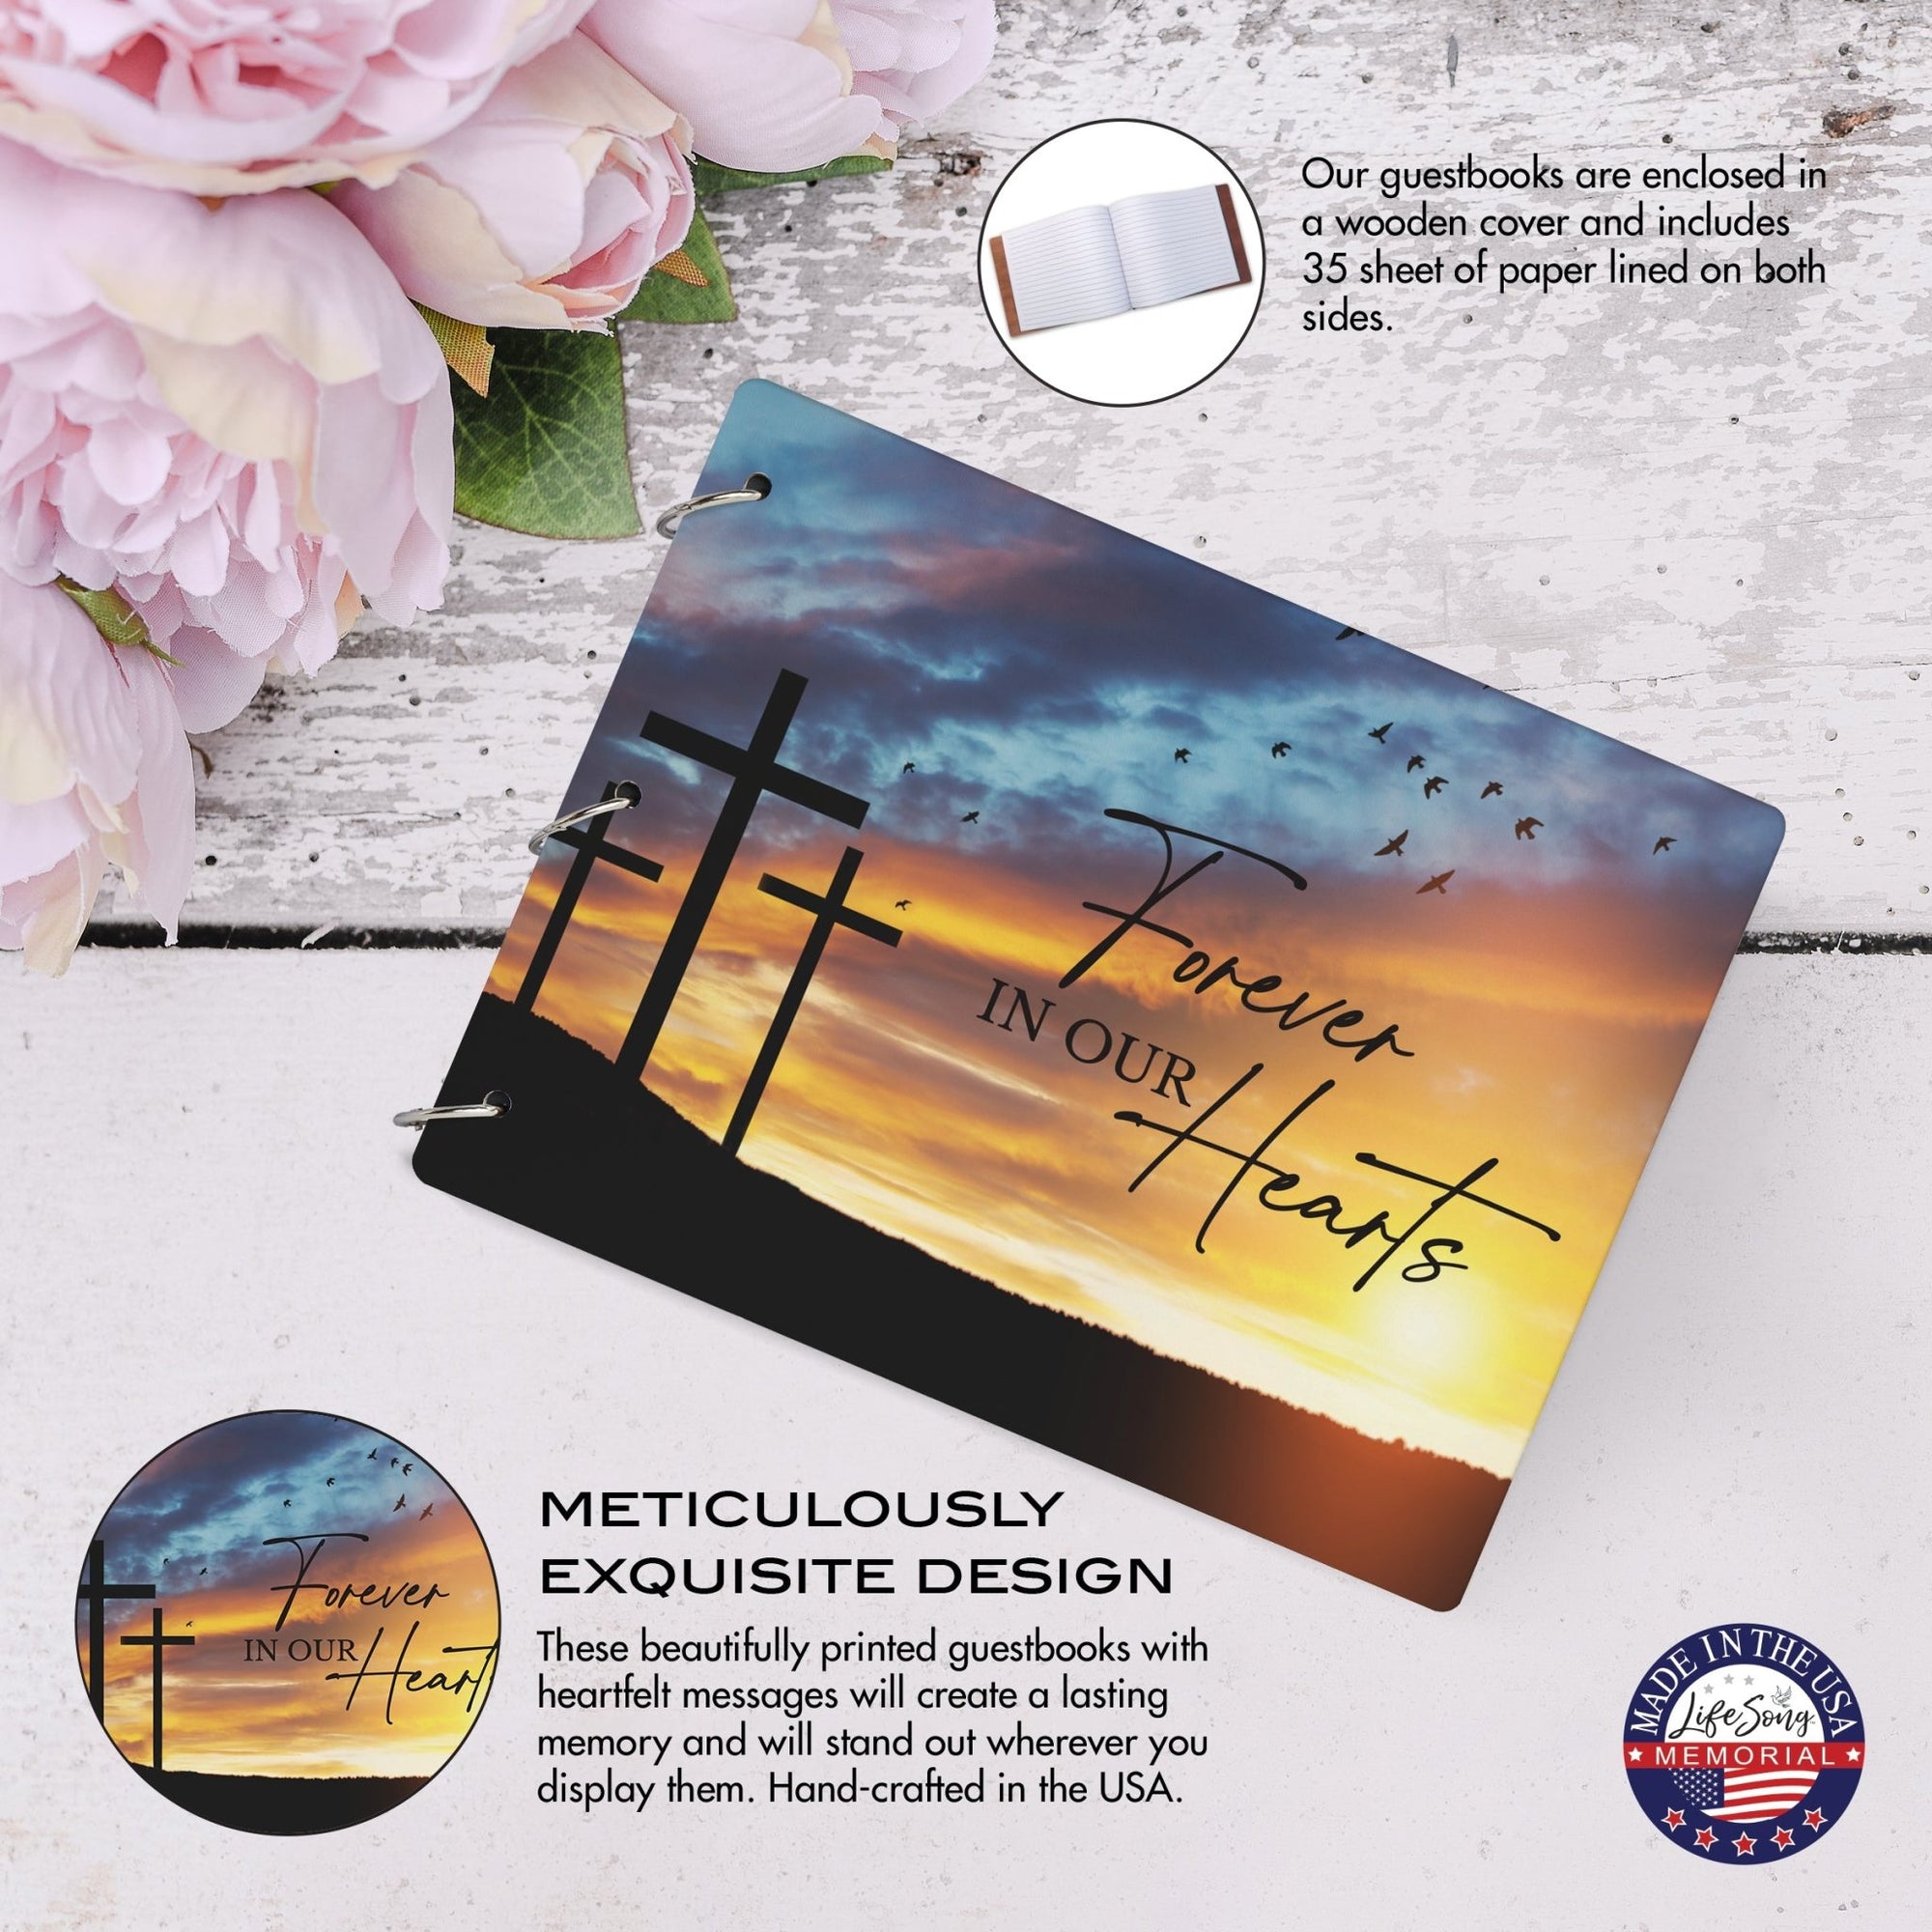 Celebration Of Life Funeral Guest Books For Memorial Services Registry With Wooden Cover - Forever In Our Hearts - LifeSong Milestones